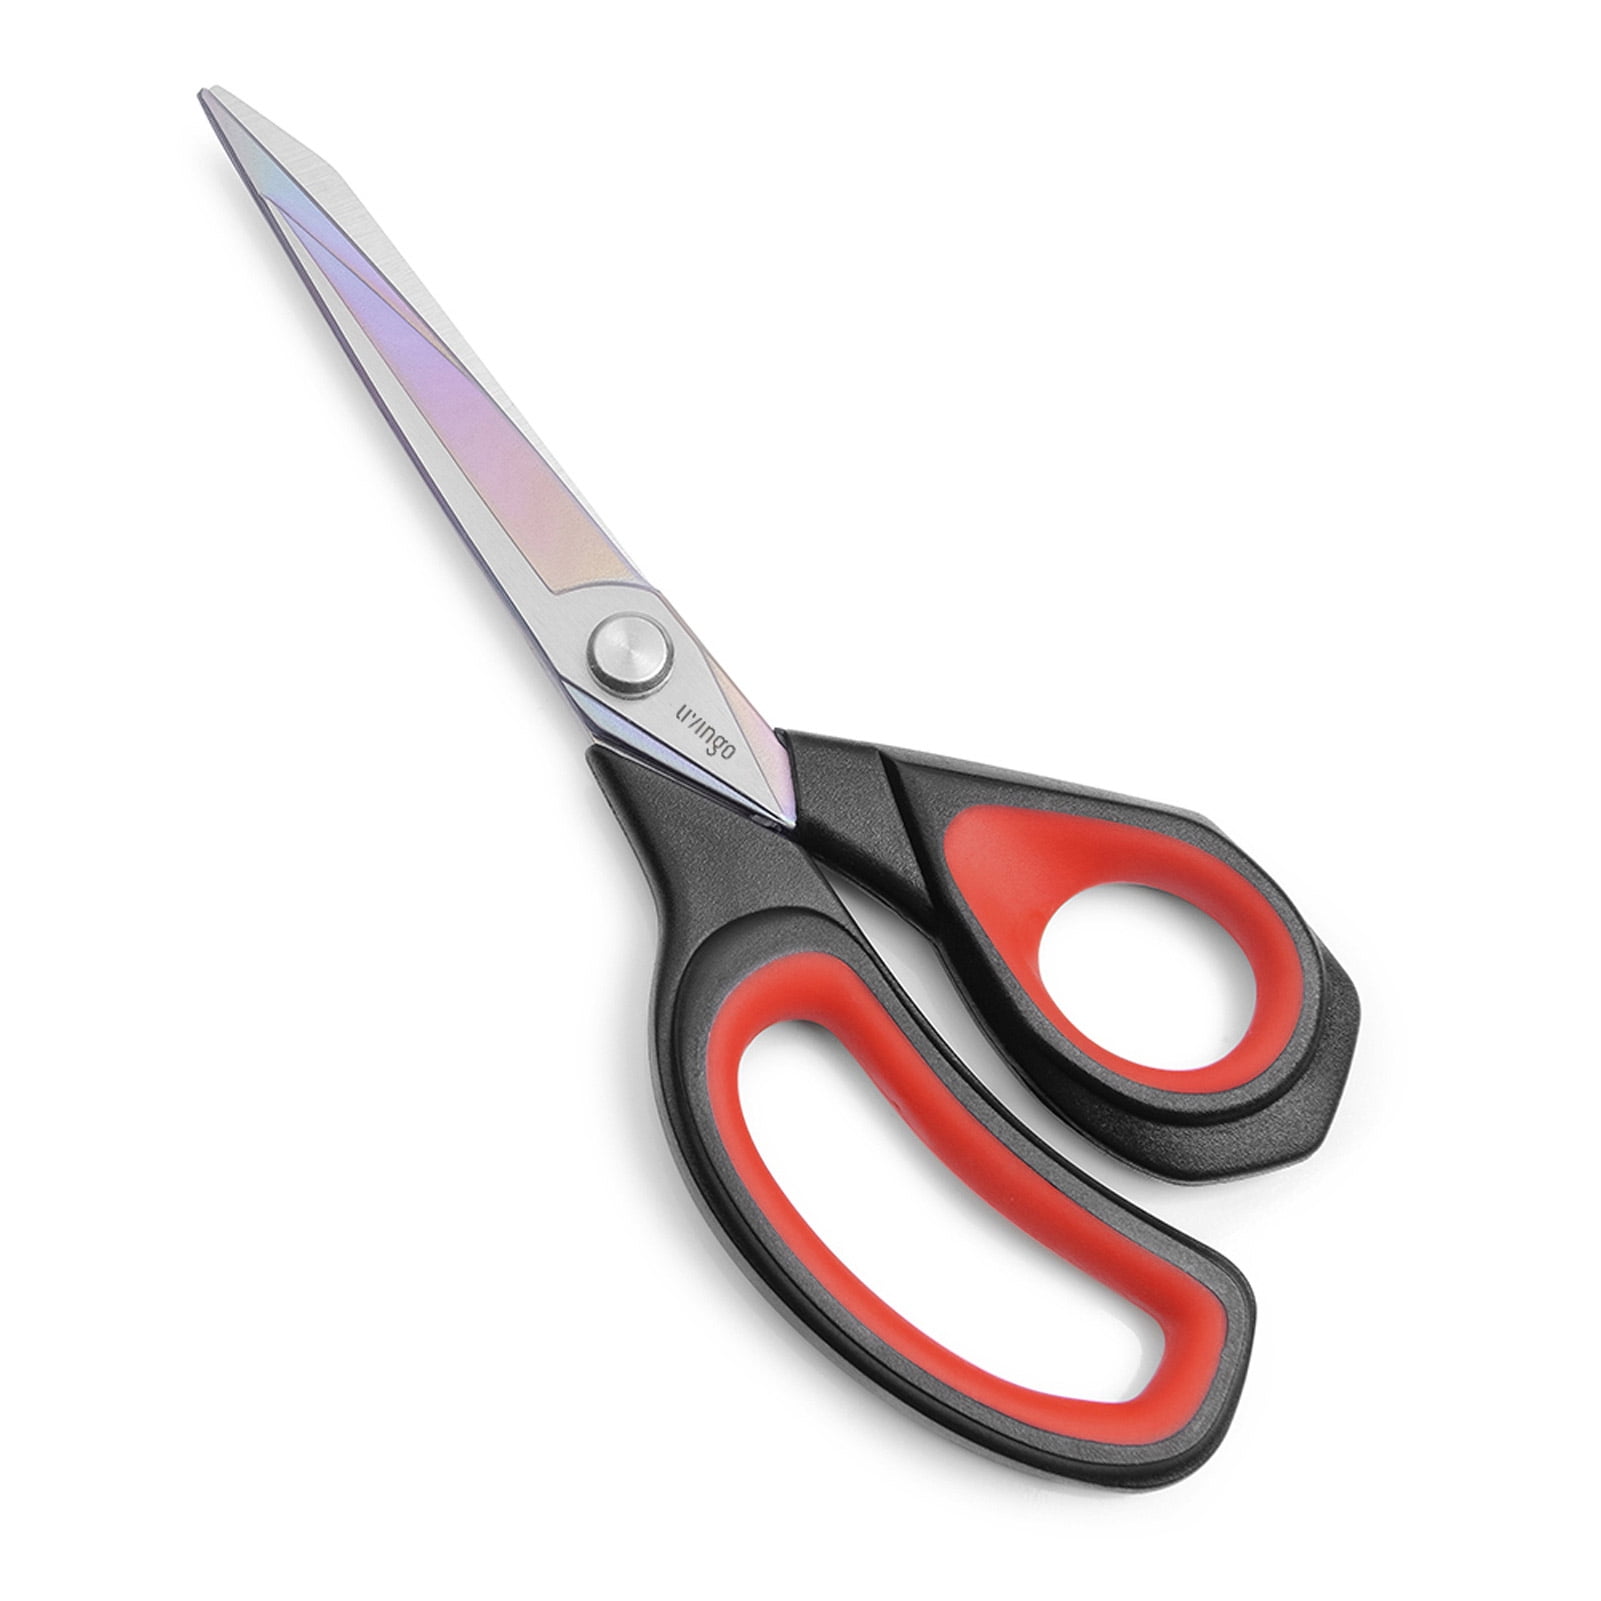 XFasten Heavy-Duty Professional Tailor Scissors 9.5 Inches (Red)